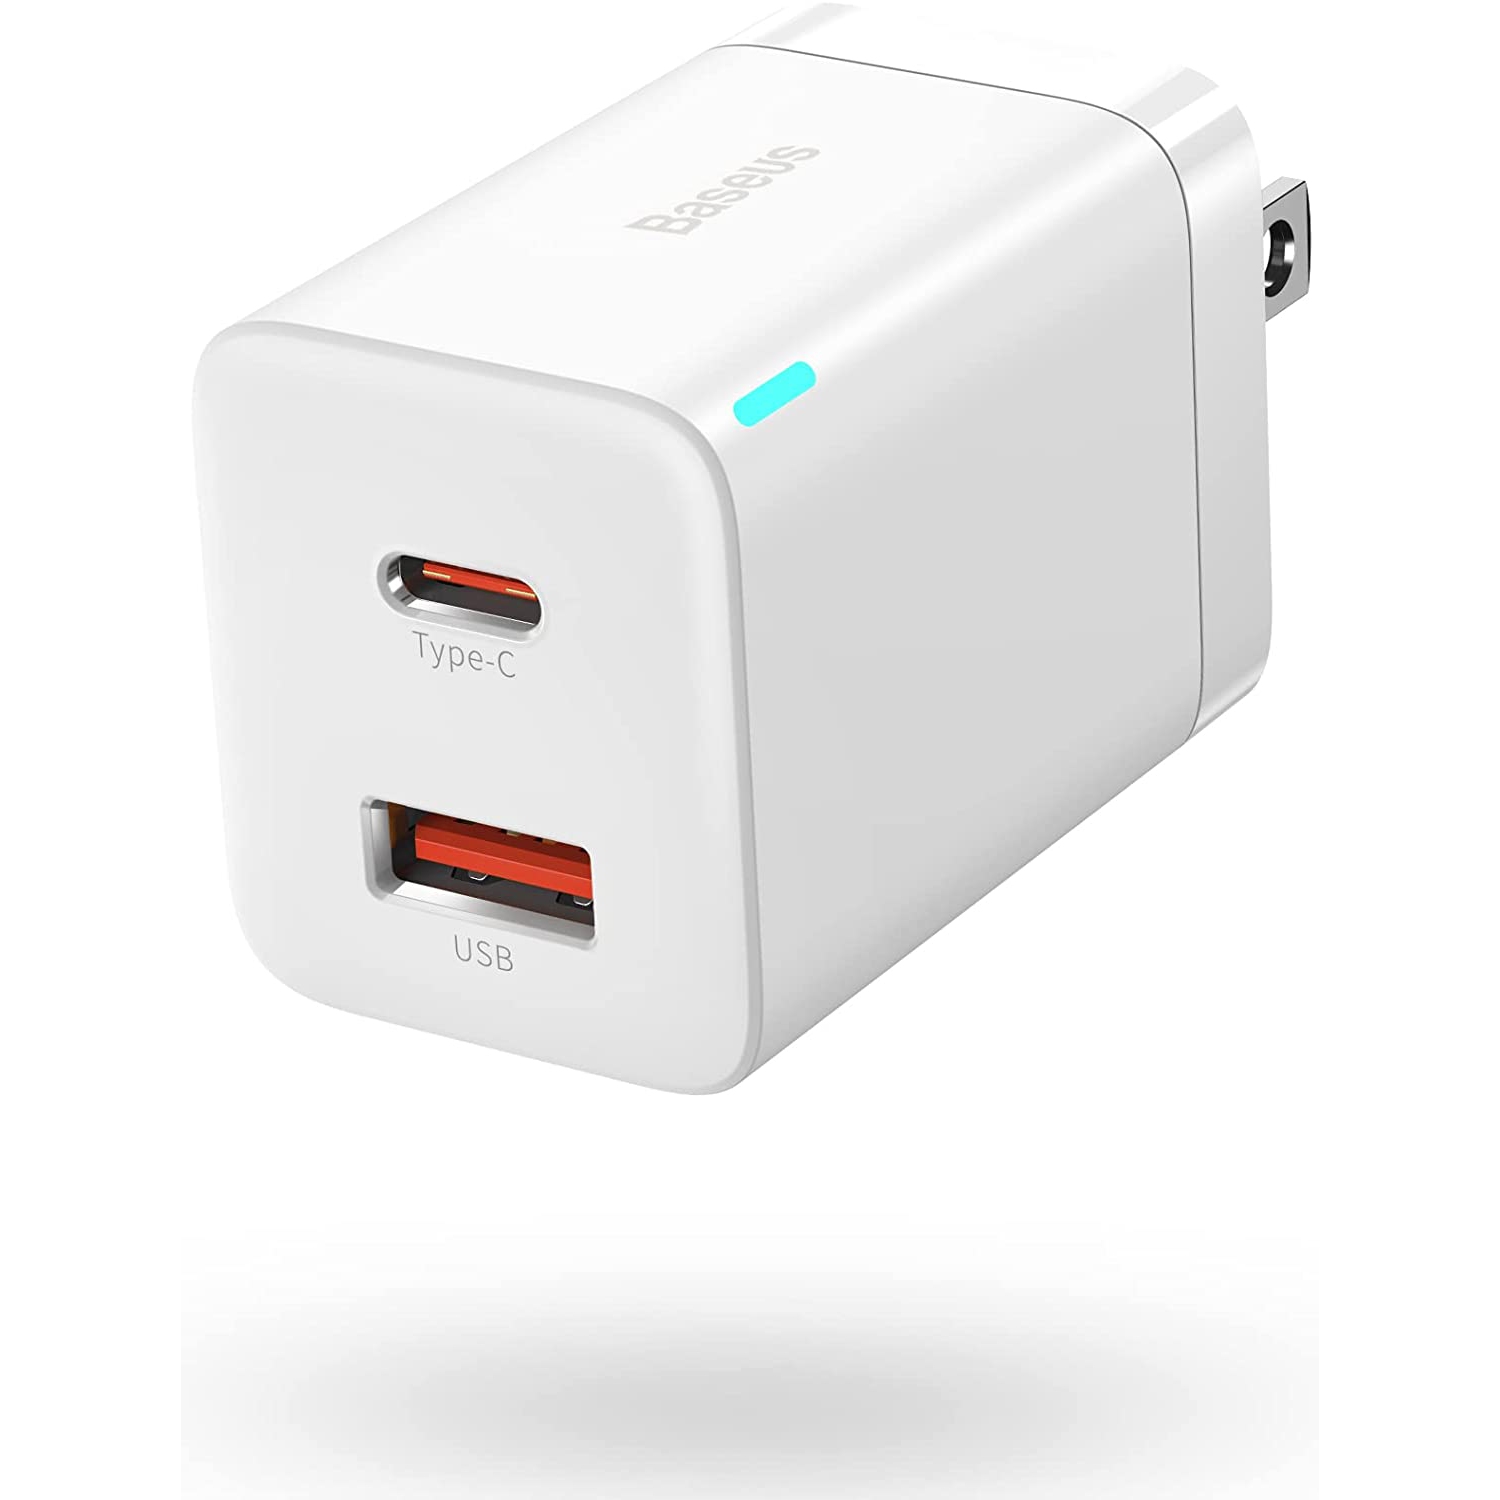 USB C Charger, Baseus 30W 2 Port SuperSi Fast Charger with Foldable Plug for iPad Pro/Air/Mini, iPhone 13/13 Mini/13 Pro/13 Pro Max/12/SE/11/XR/XS, Samsung, Pixel 6 (White)